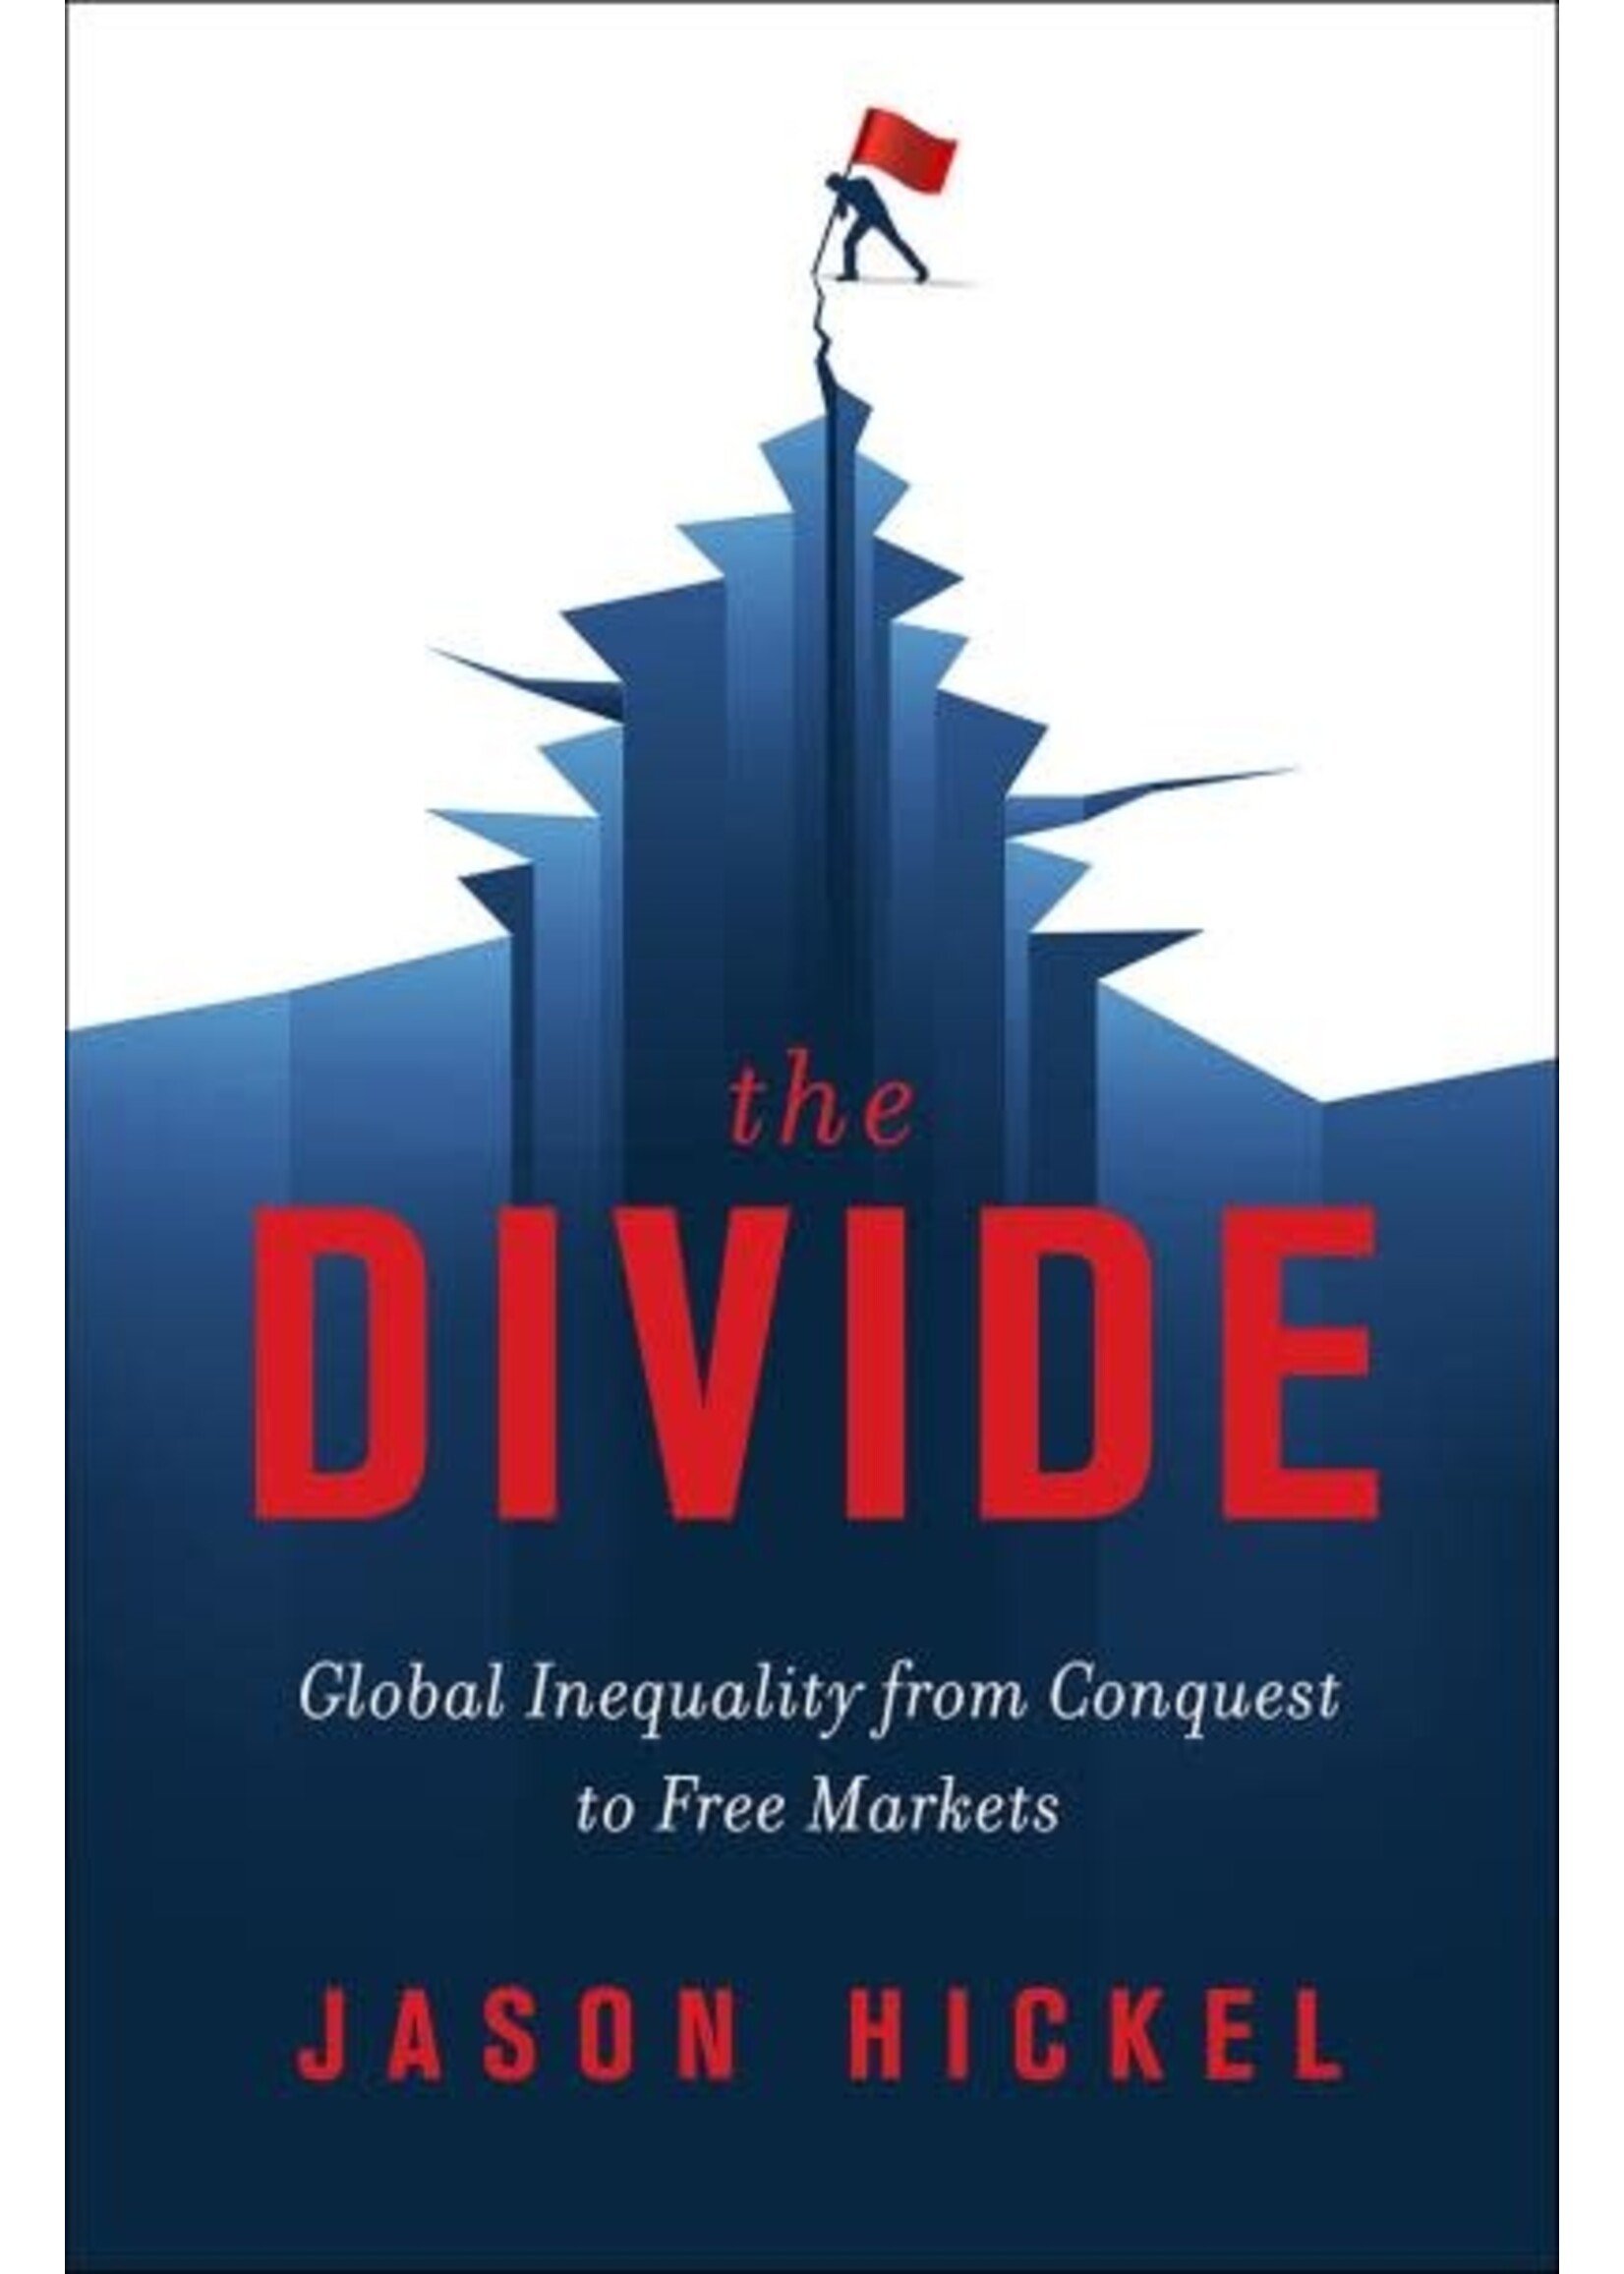 The Divide: Global Inequality from Conquest to Free Markets by Jason Hickel